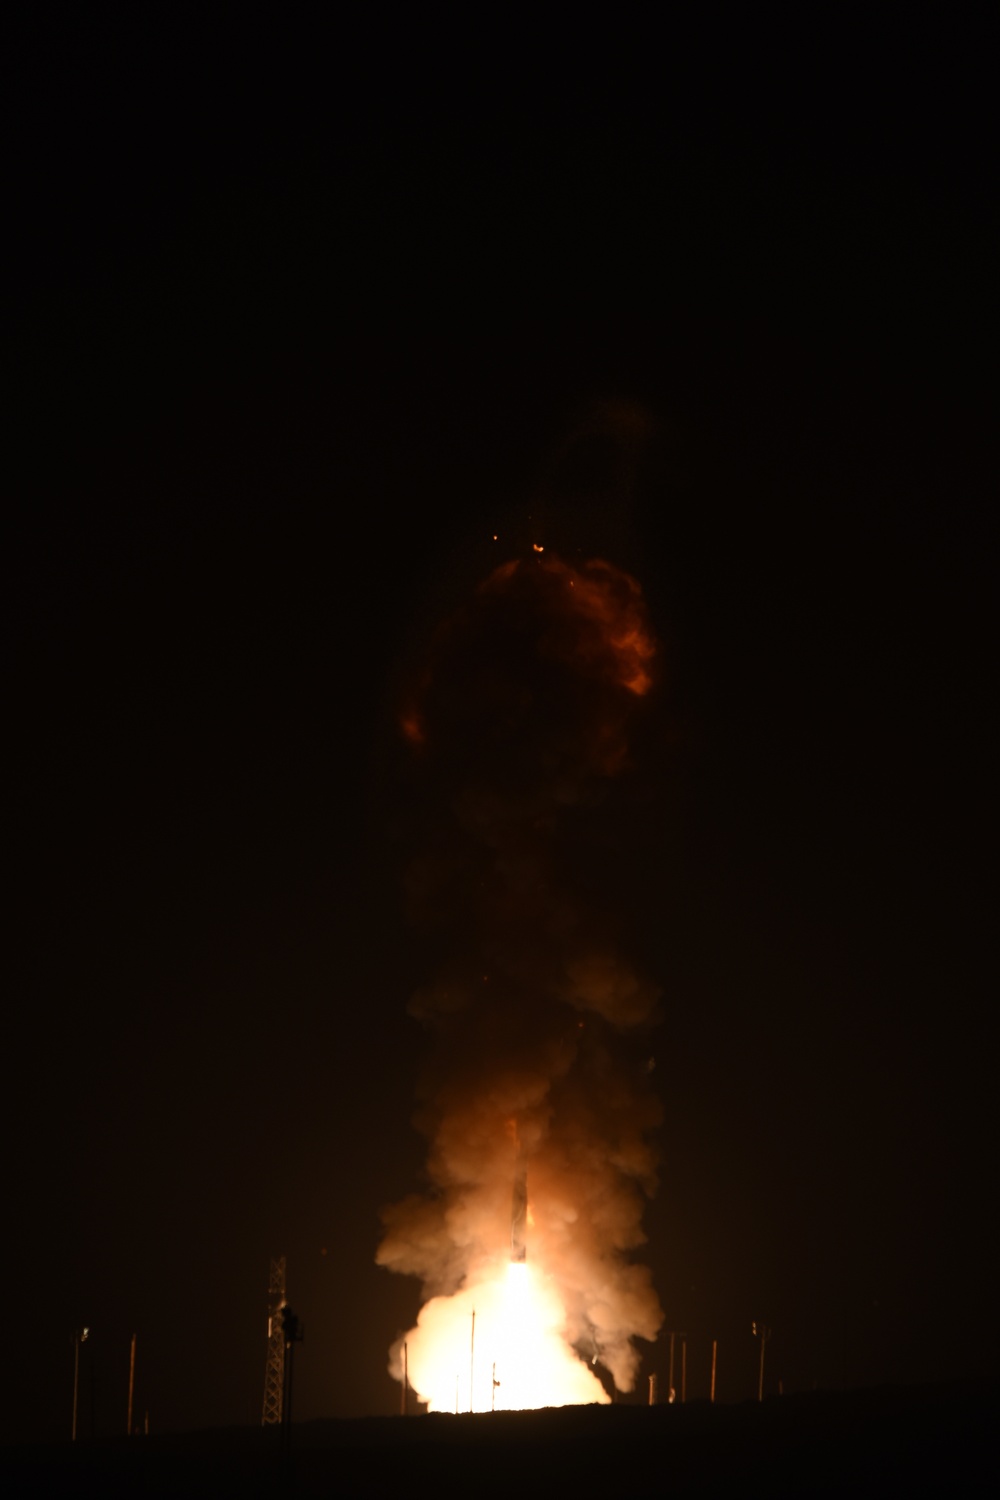 MMIII launches from Vandenberg